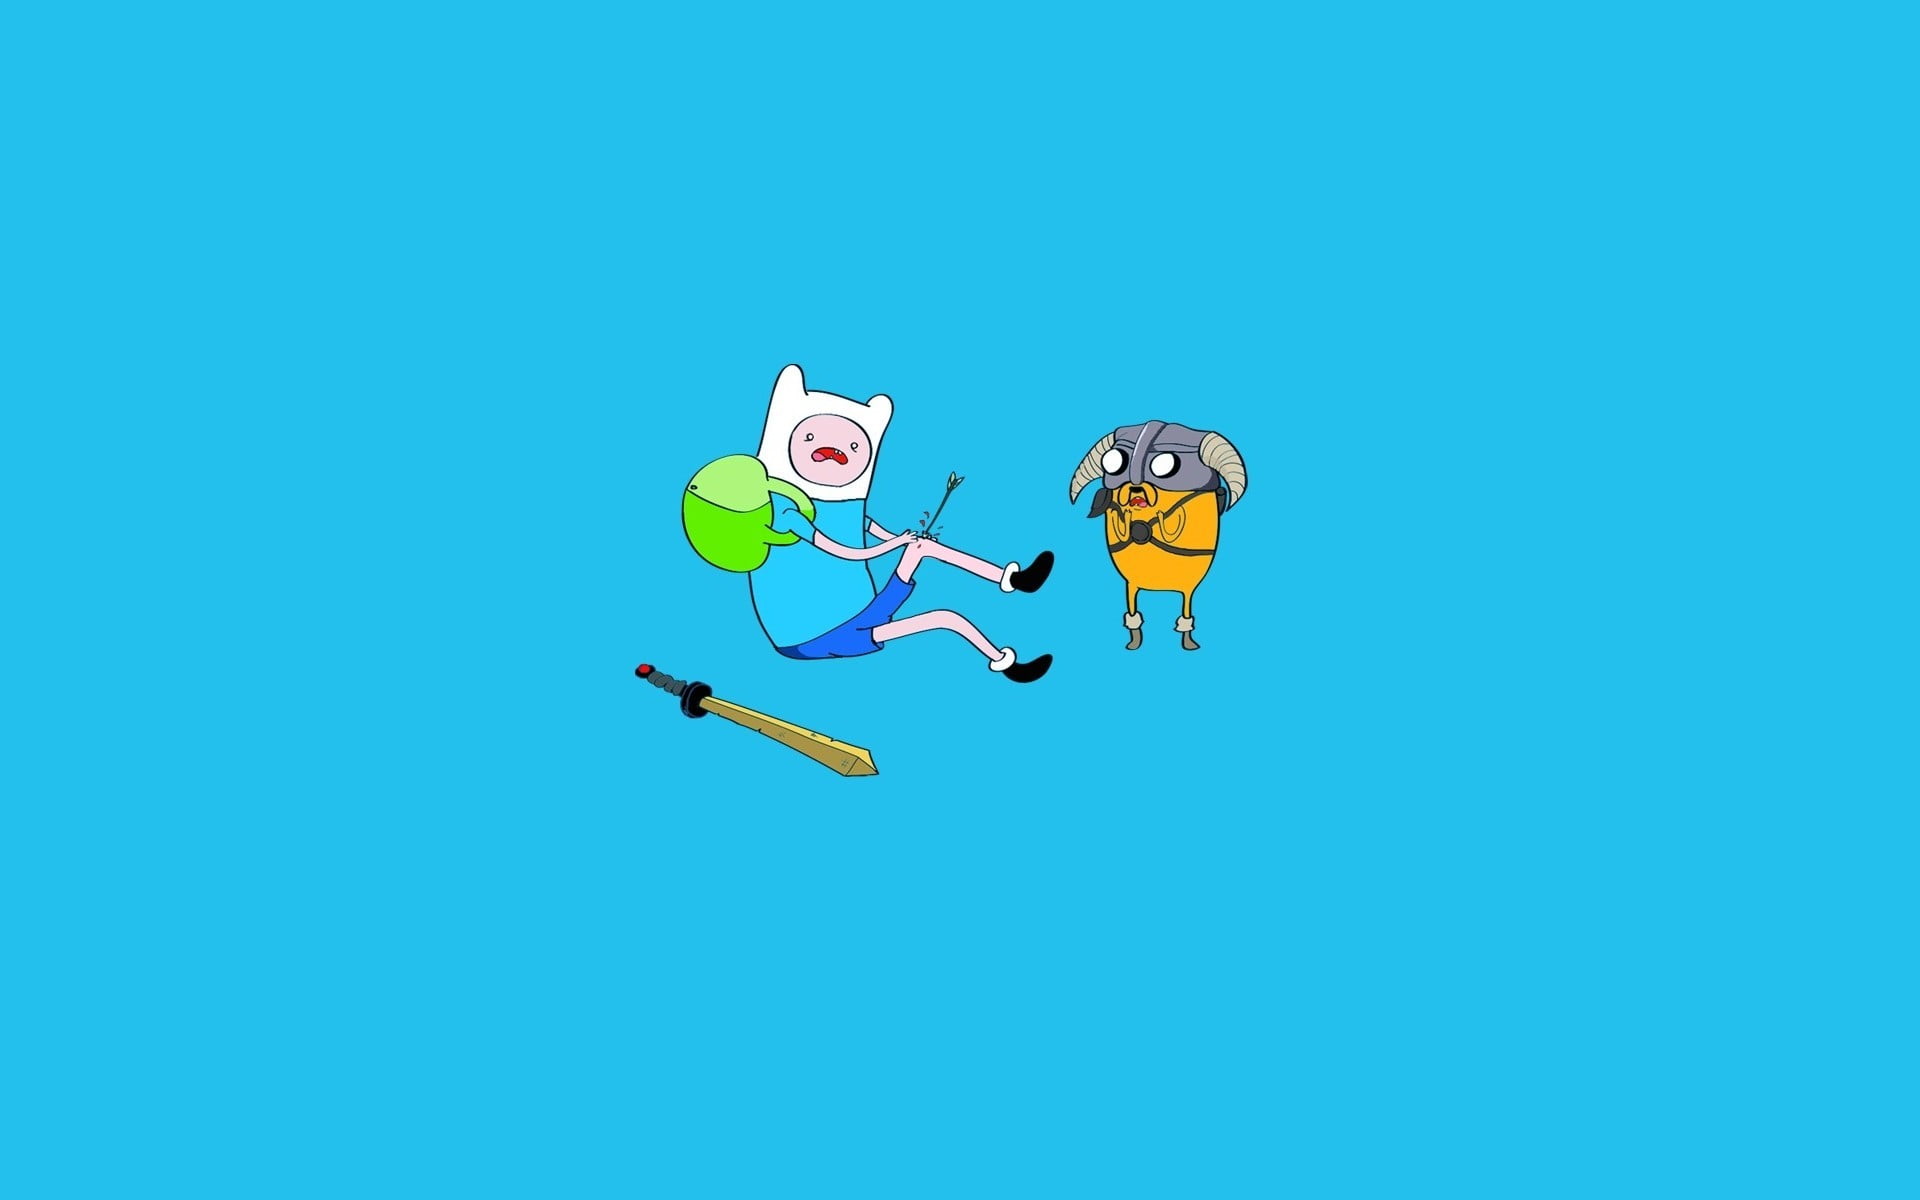 Finn and Jake of Adventure Time